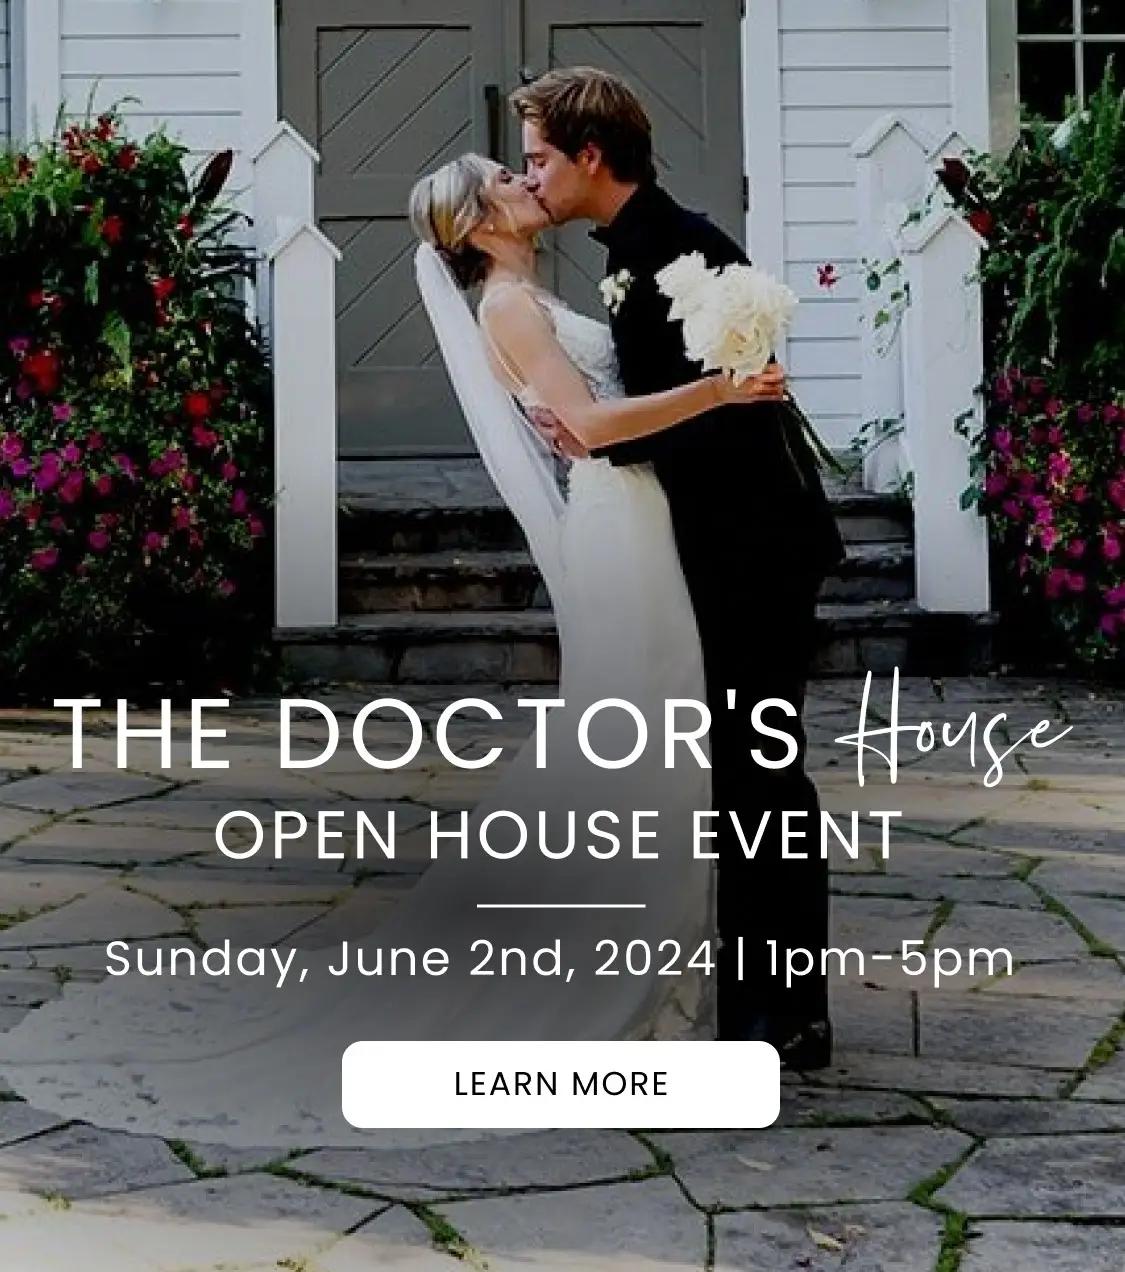 The Doctor's House Open House Event Mobile Banner